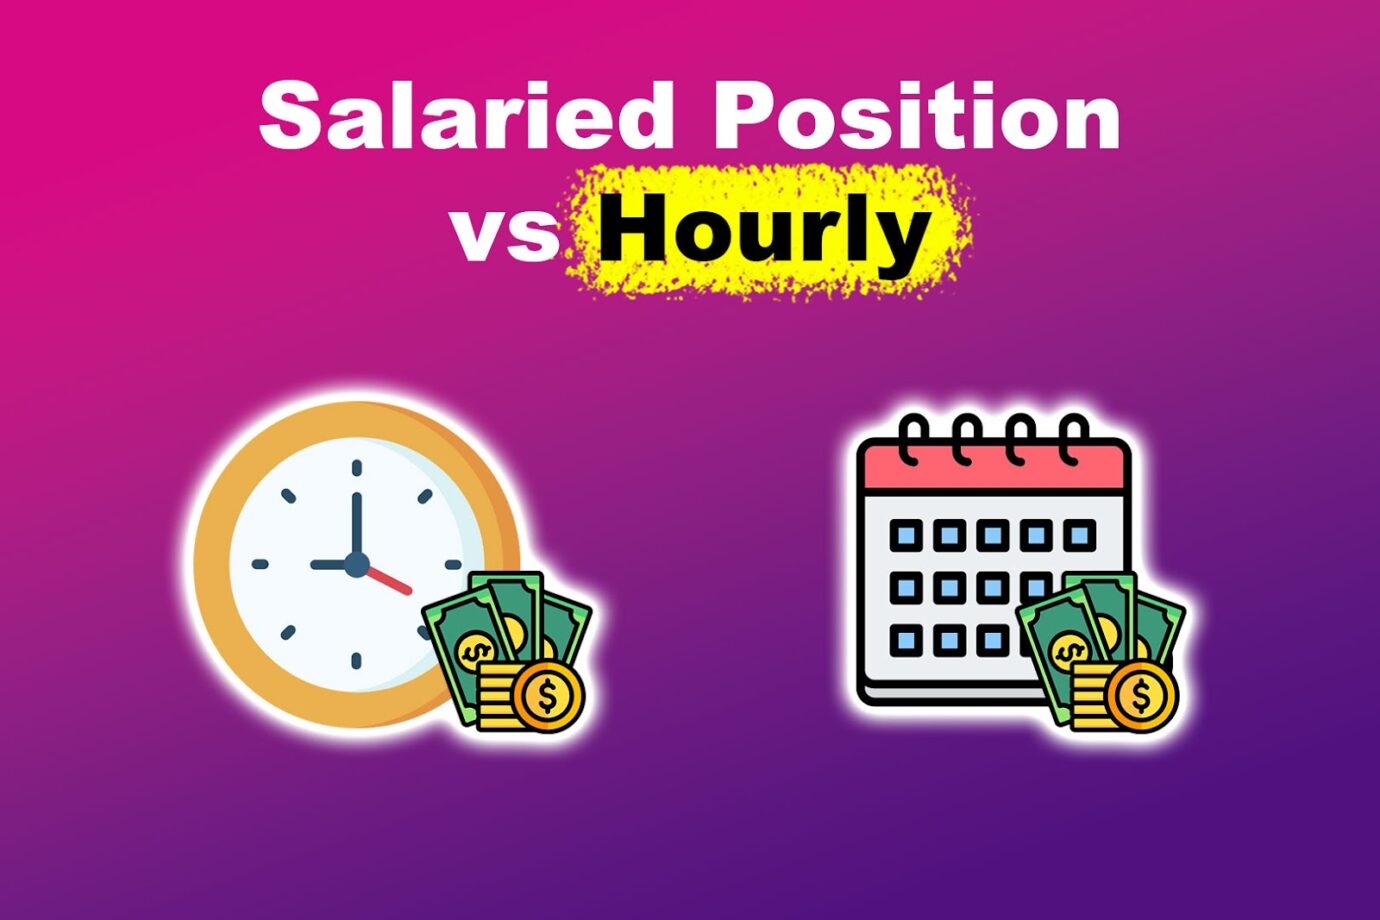 Salaried Position Vs Hourly